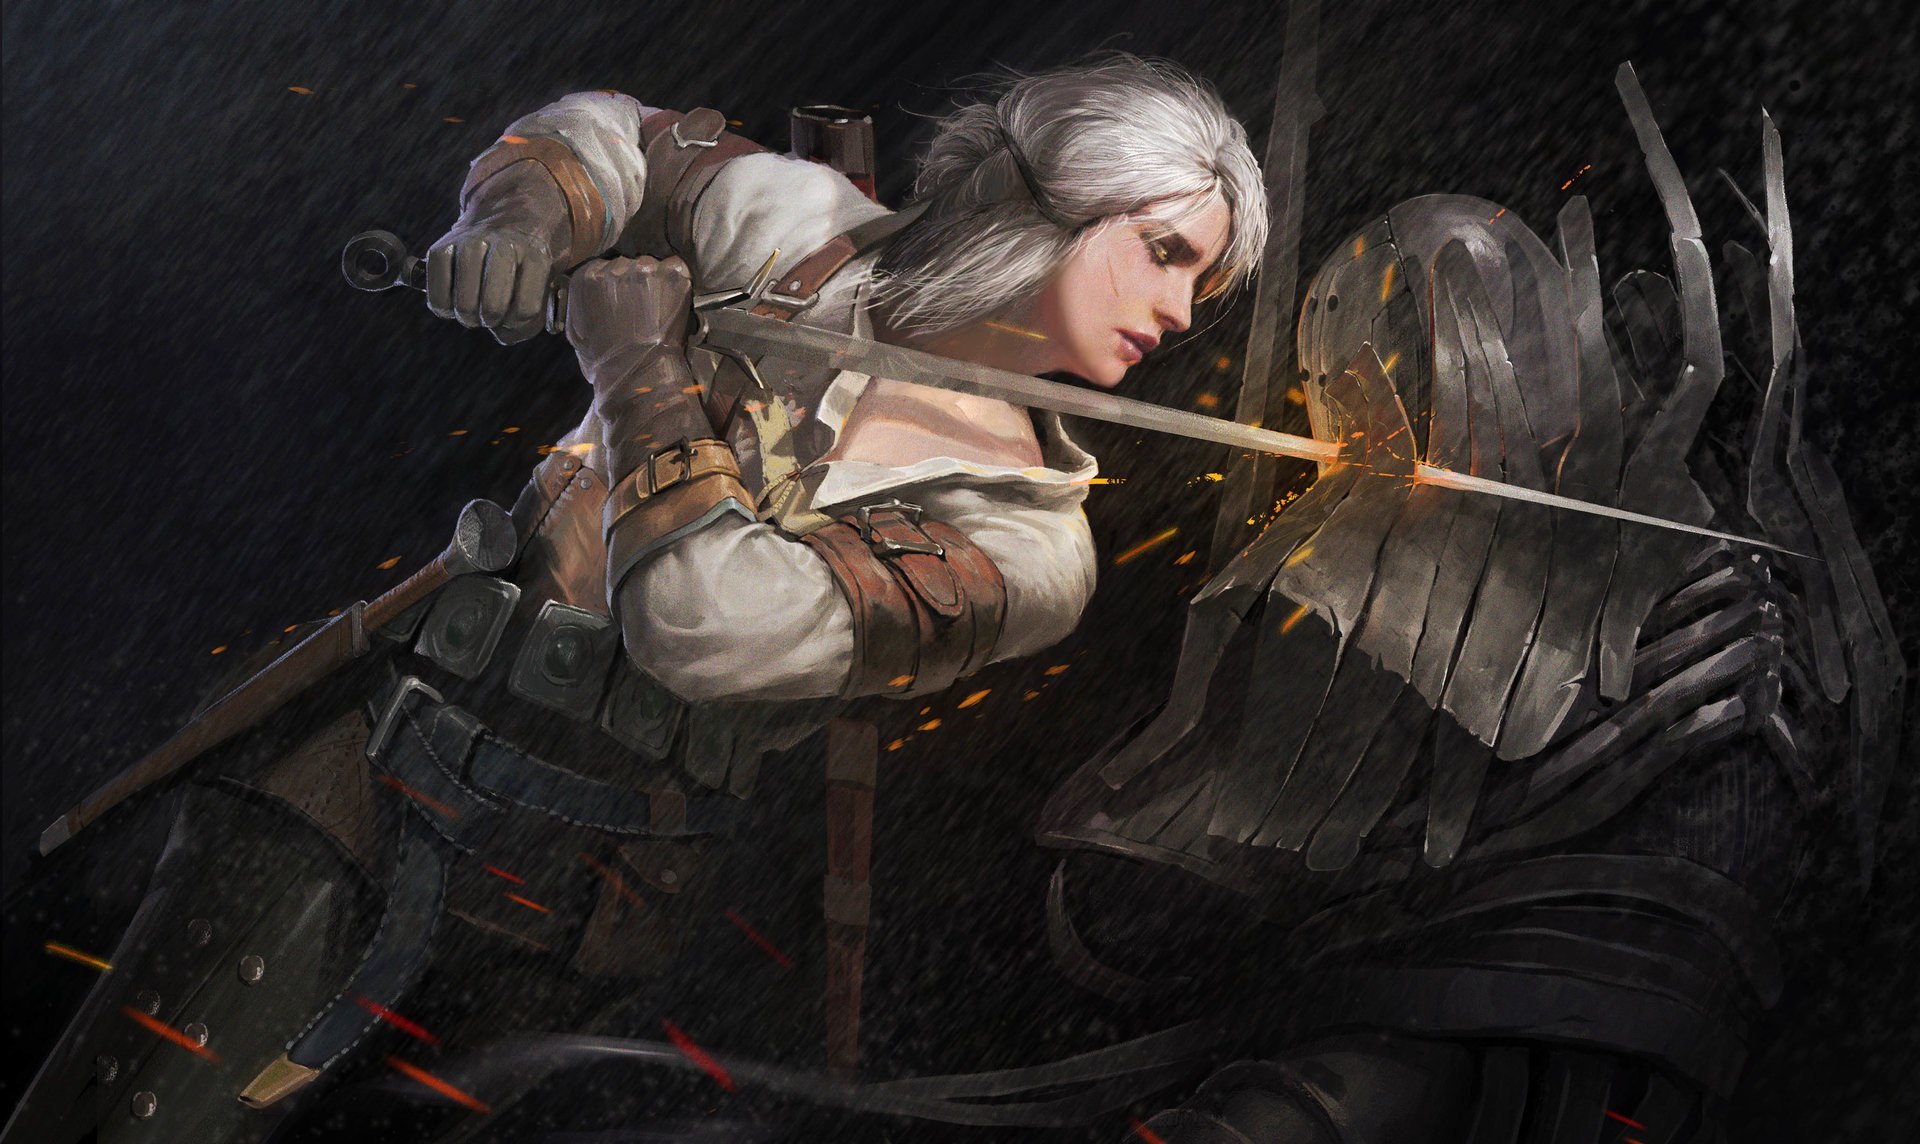 The Witcher 3 Wild Hunt Ciri The Witcher Sword Woman Warrior Armor White Hair Imlerith The Witcher 1920x1144